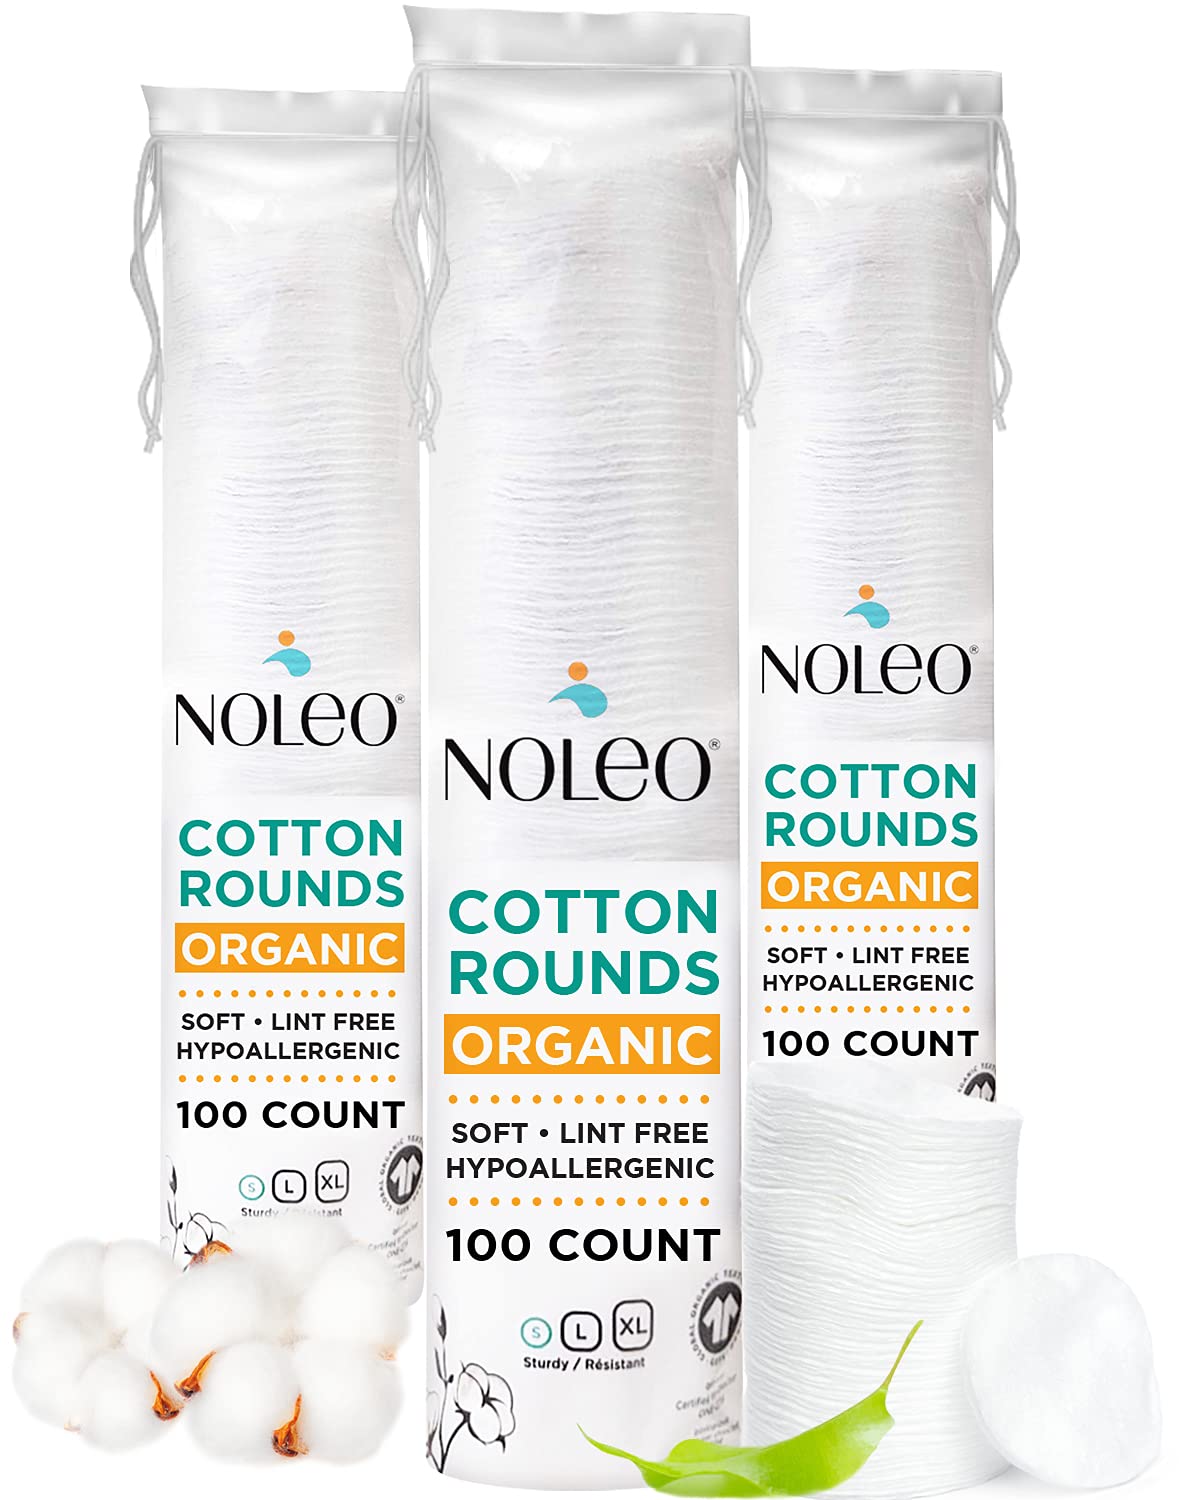 Organic Cotton Rounds Compatible with Makeup Products, Eye Makeup Remover Pads and Baby Wipes, Small, 300 Count - Noleo